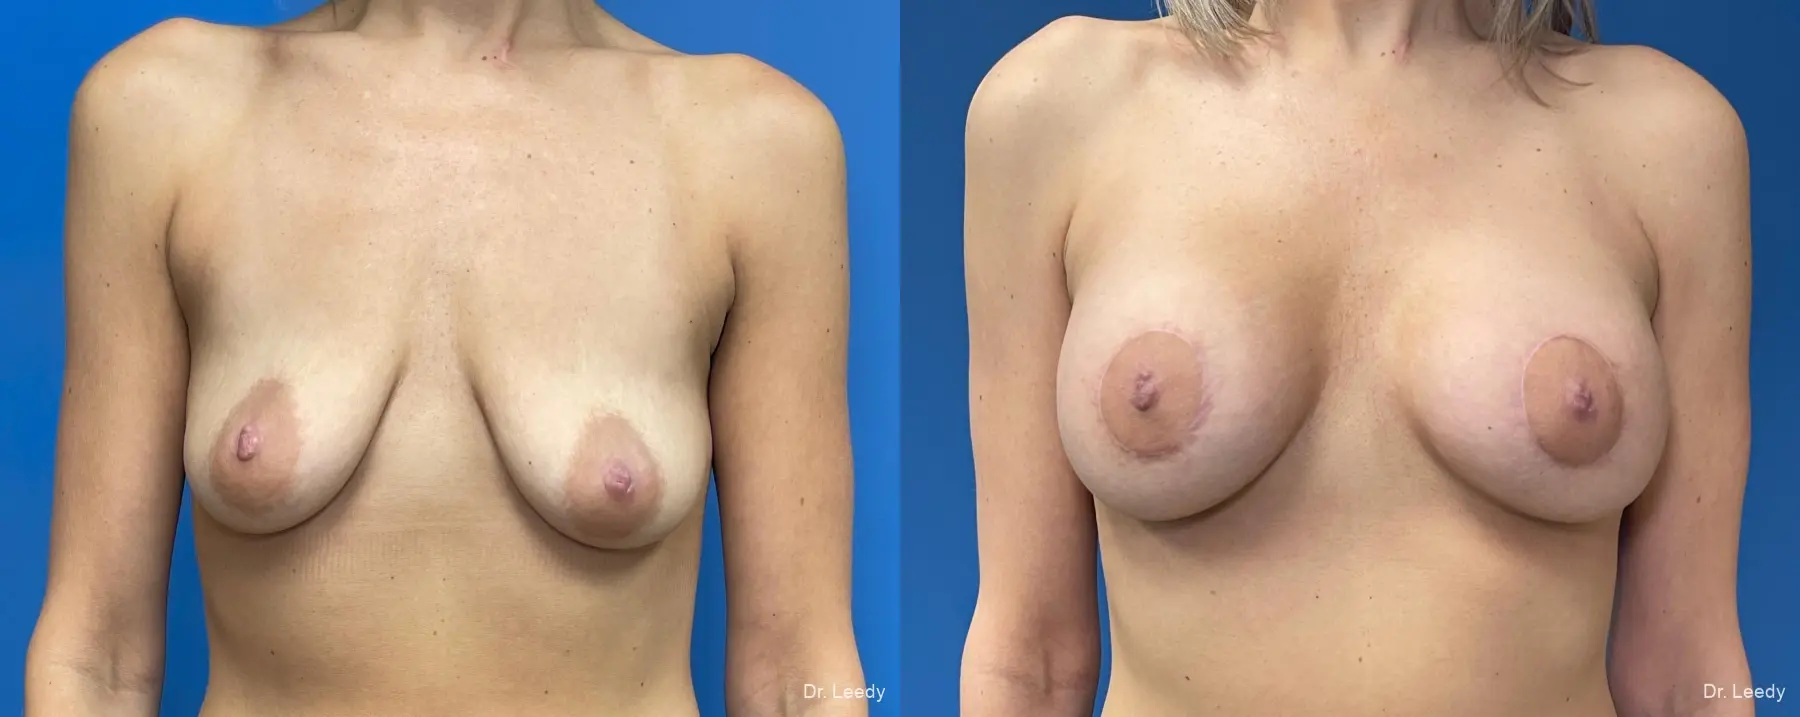 Breast Lift And Augmentation: Patient 2 - Before and After 1